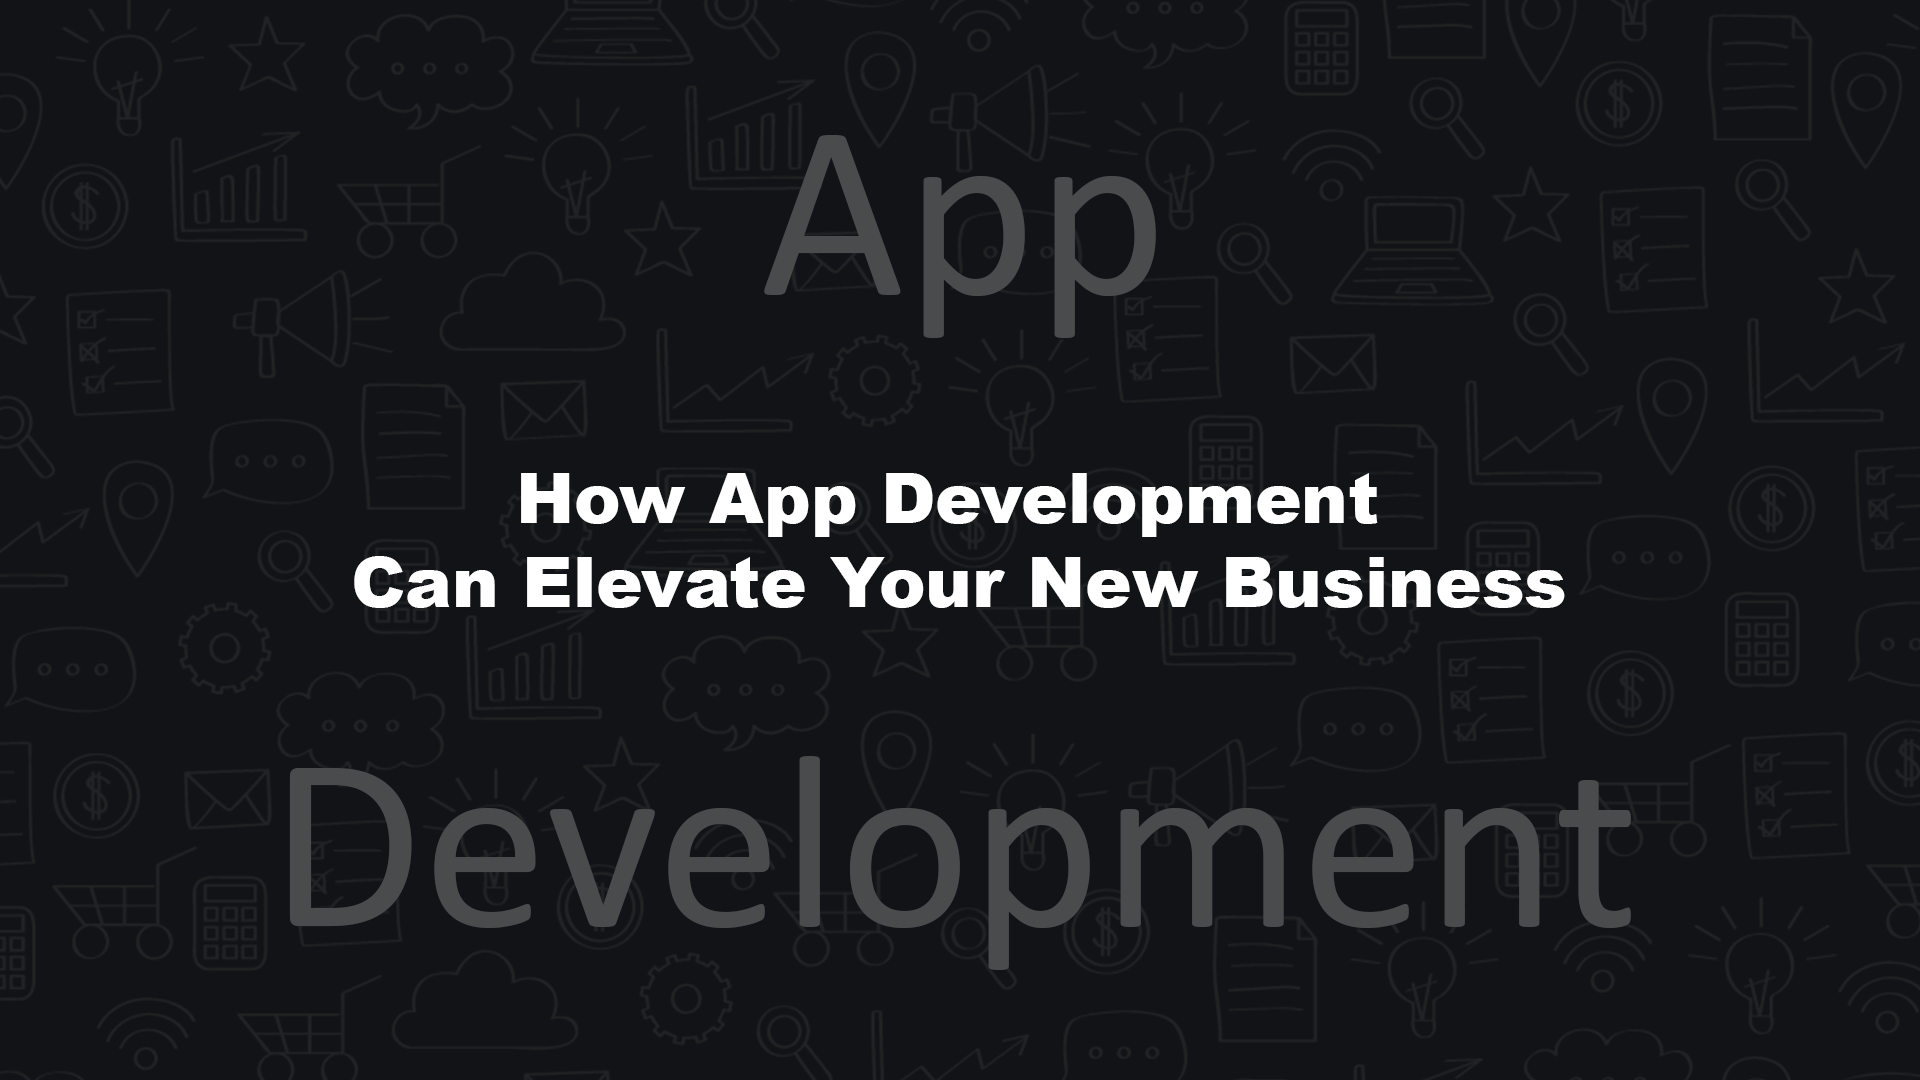 App Development Can Elevate Your New Business